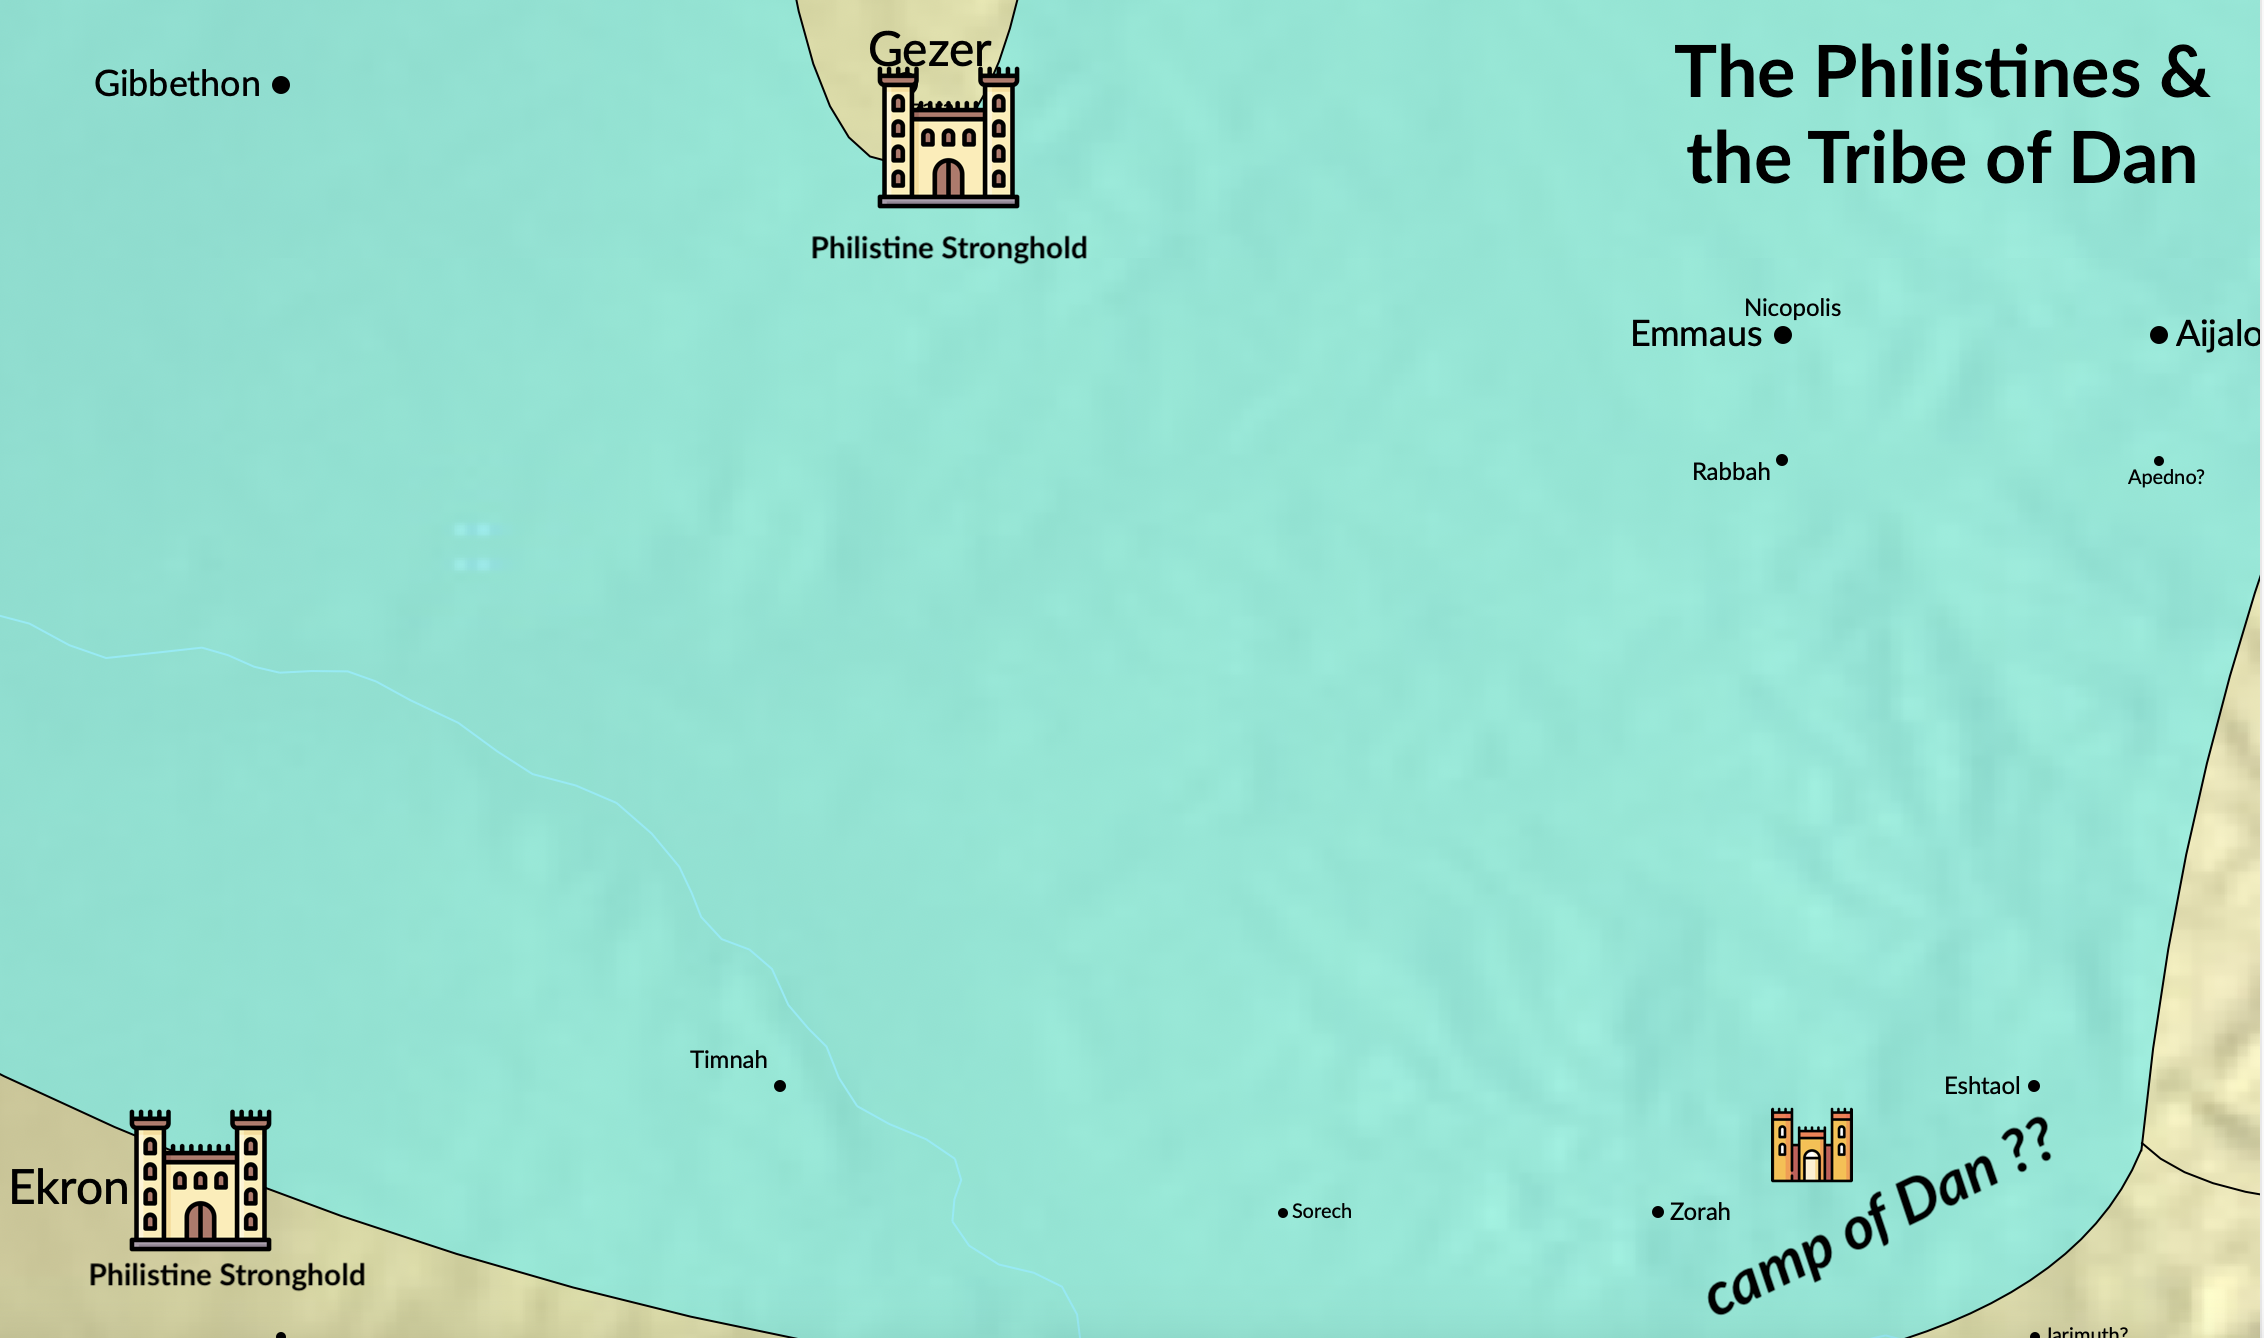 A map of the "Camp of Dan" within the tribe of Dan.